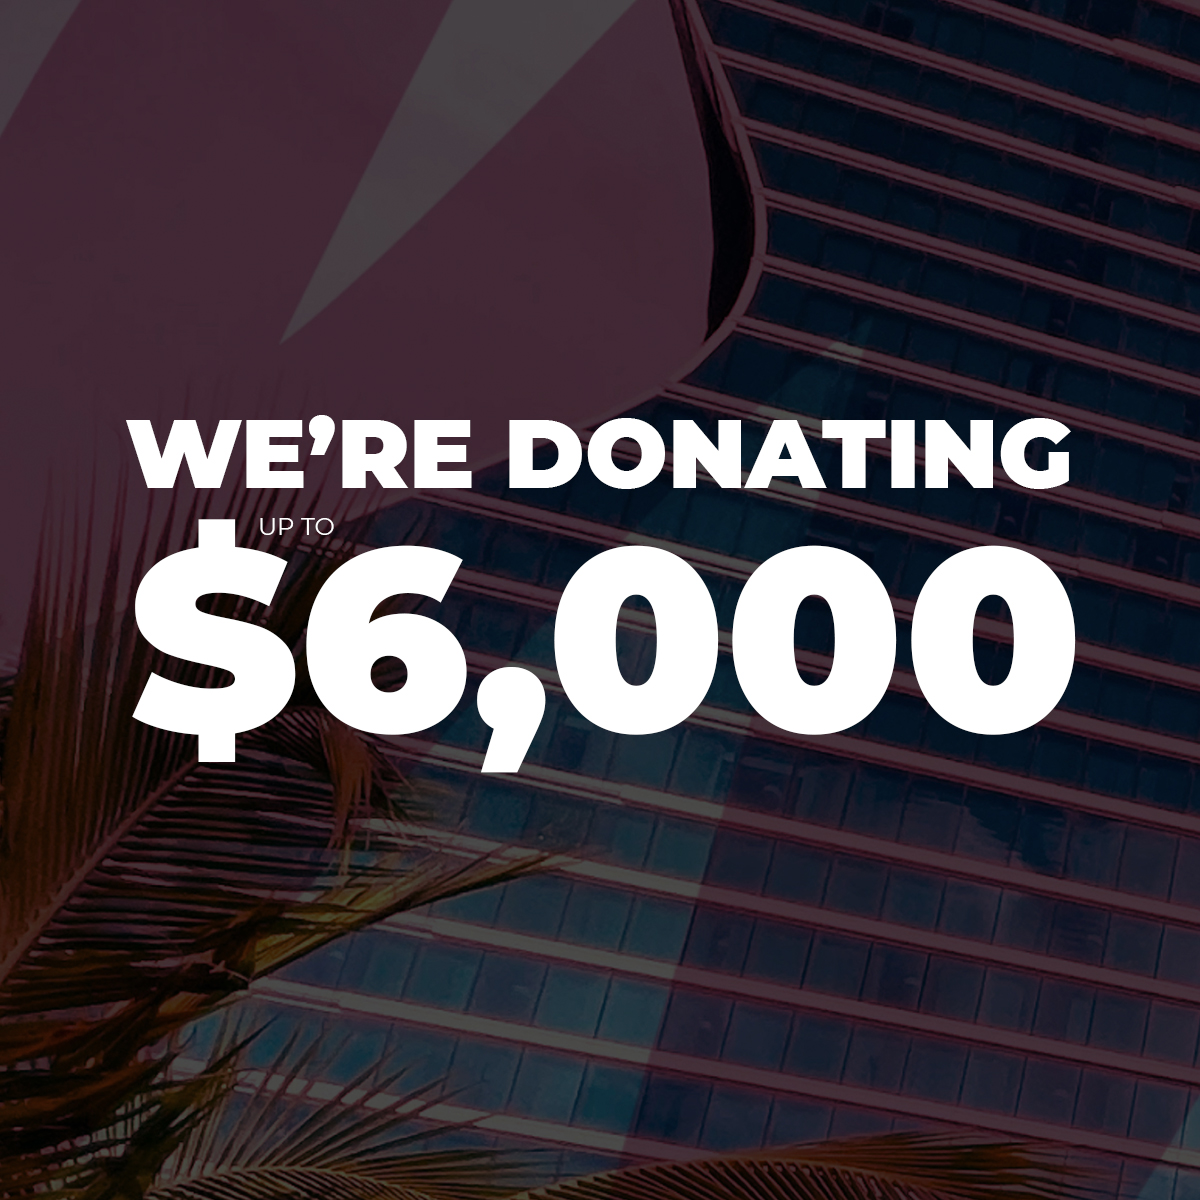 We're donating $6000!